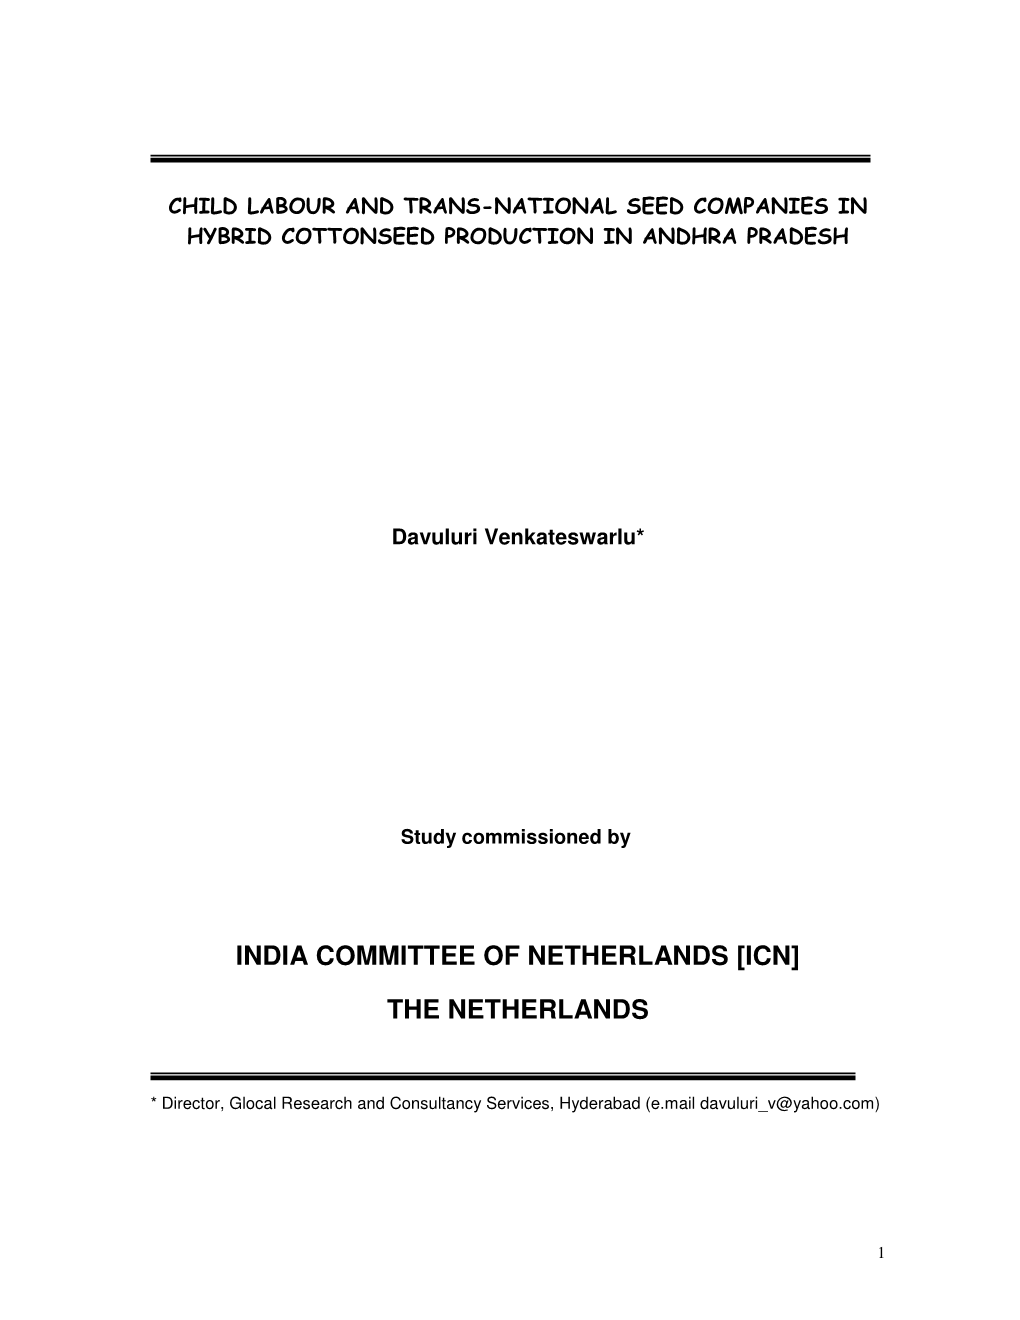 India Committee of Netherlands [Icn] the Netherlands